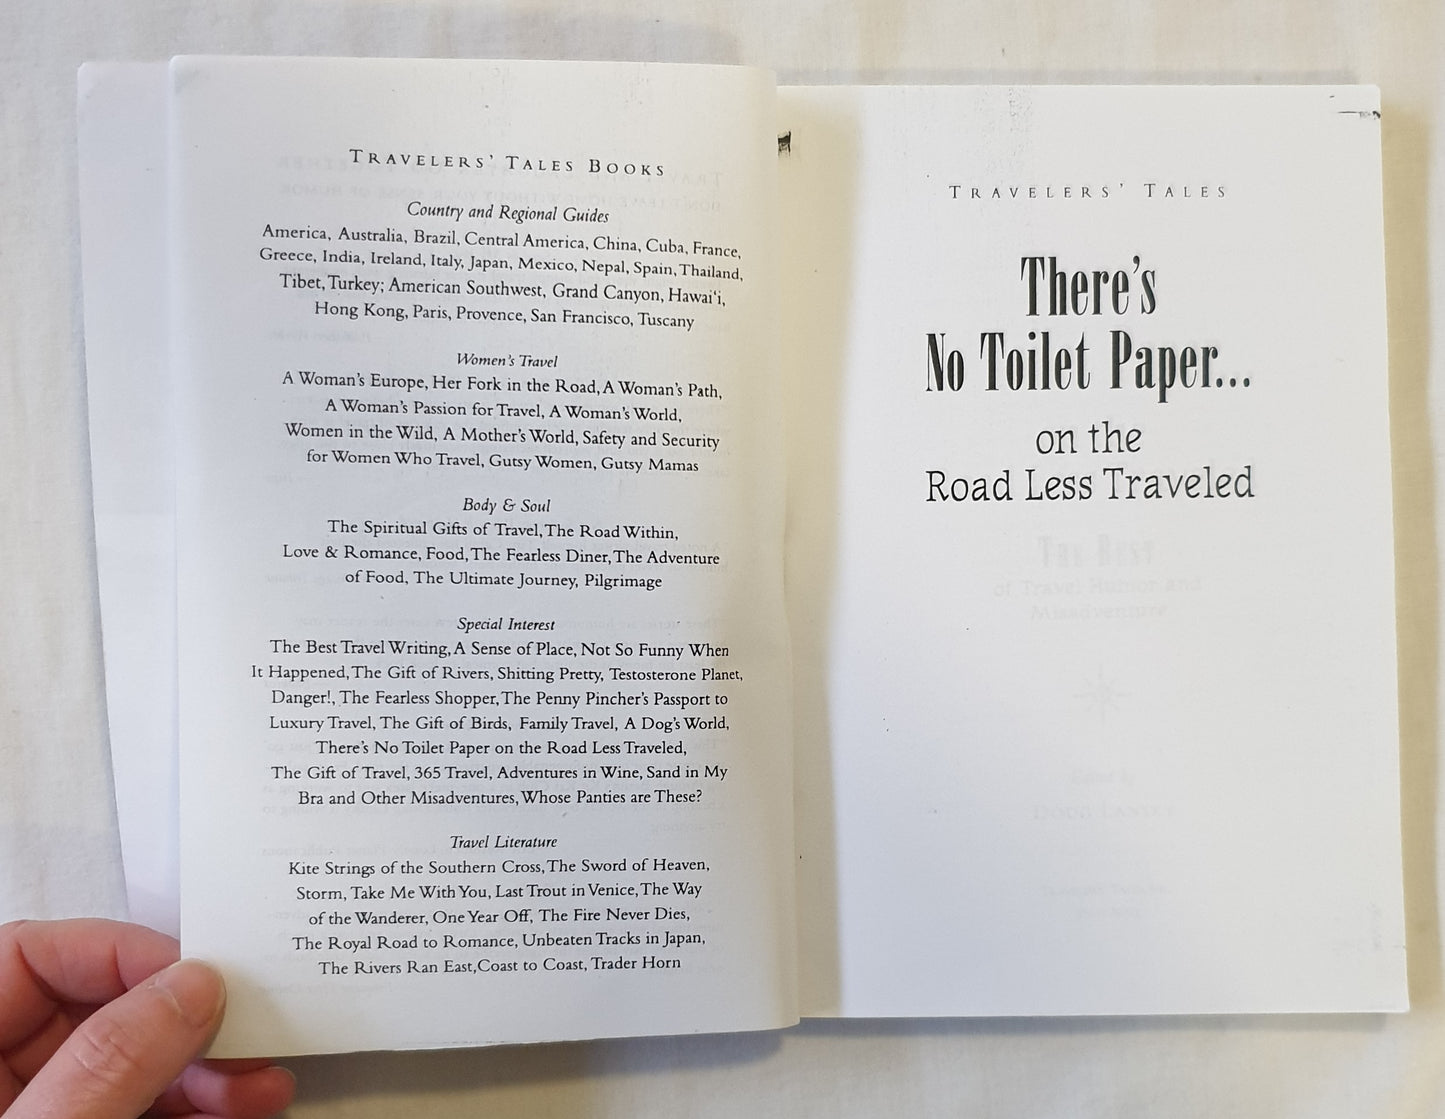 There's No Toilet Paper... by Doug Lansky